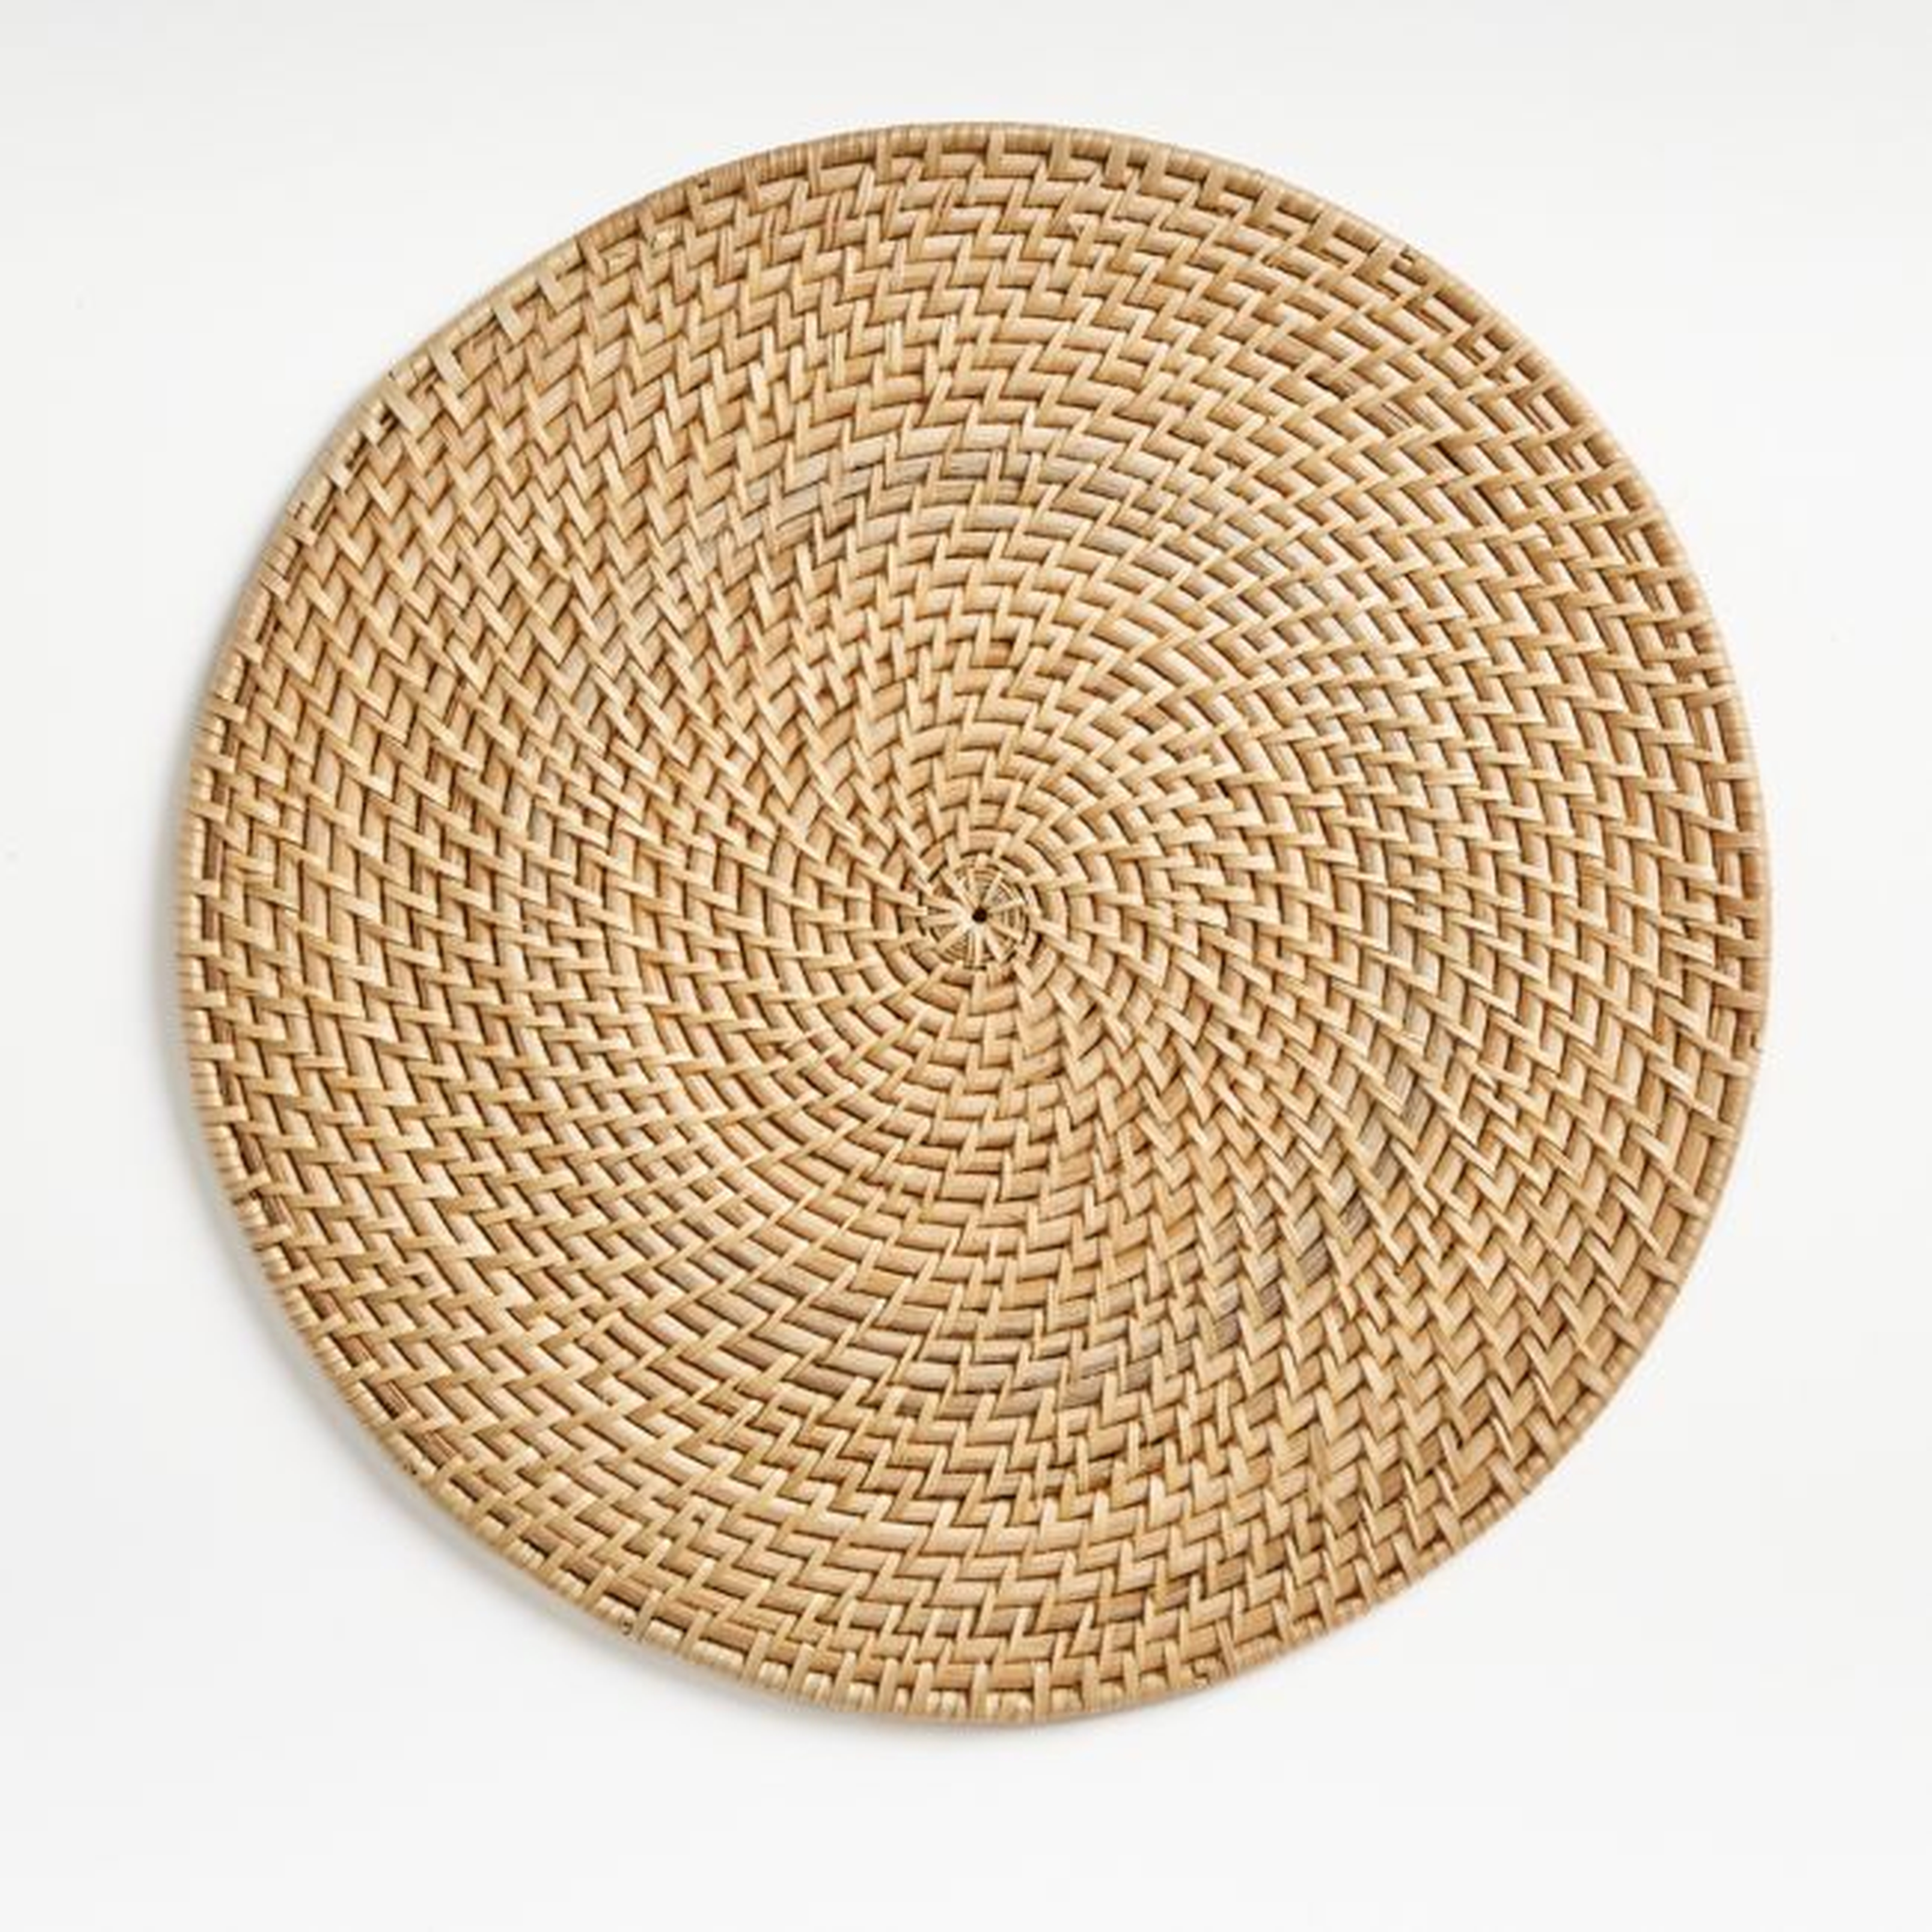 Artesia Round Natural Woven Rattan Placemat - Crate and Barrel